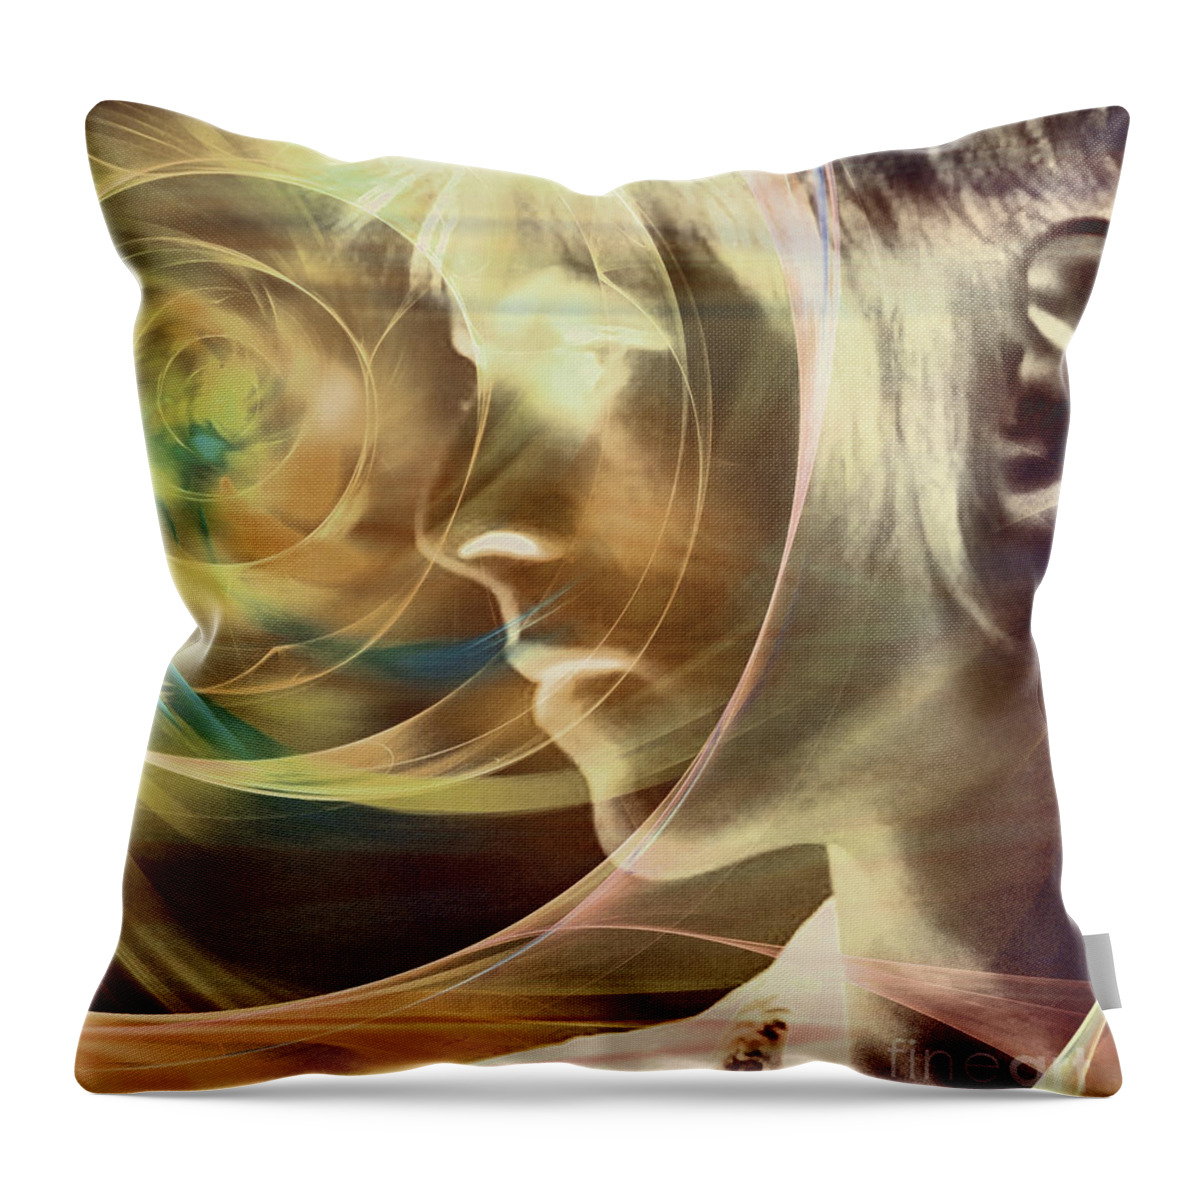 David Bowie Throw Pillow featuring the digital art David Bowie / Transcendent by Elizabeth McTaggart